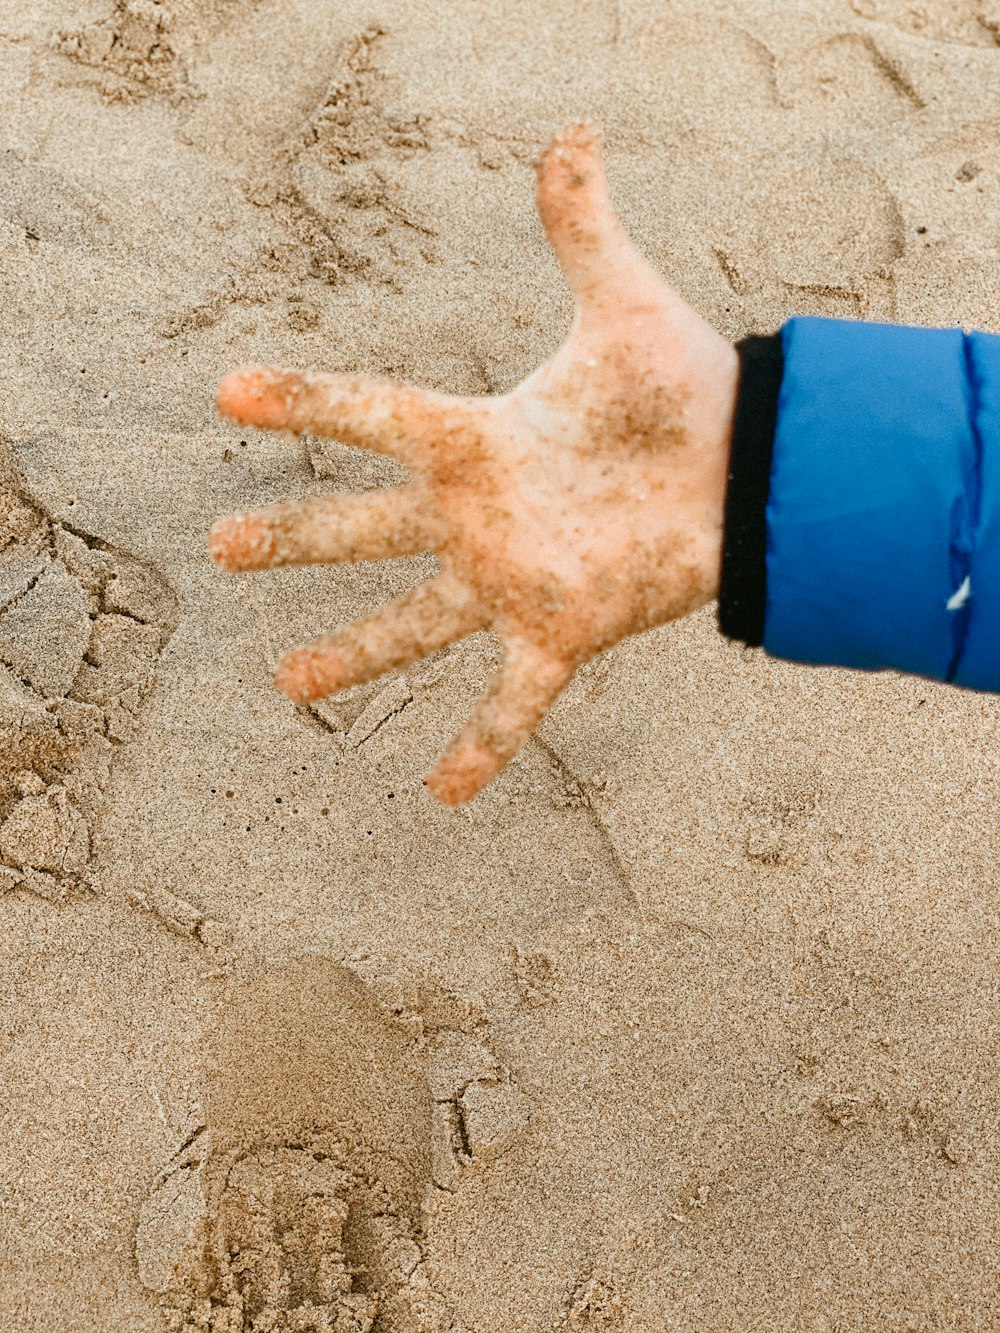 a person's hand holding a frisbee in the sand